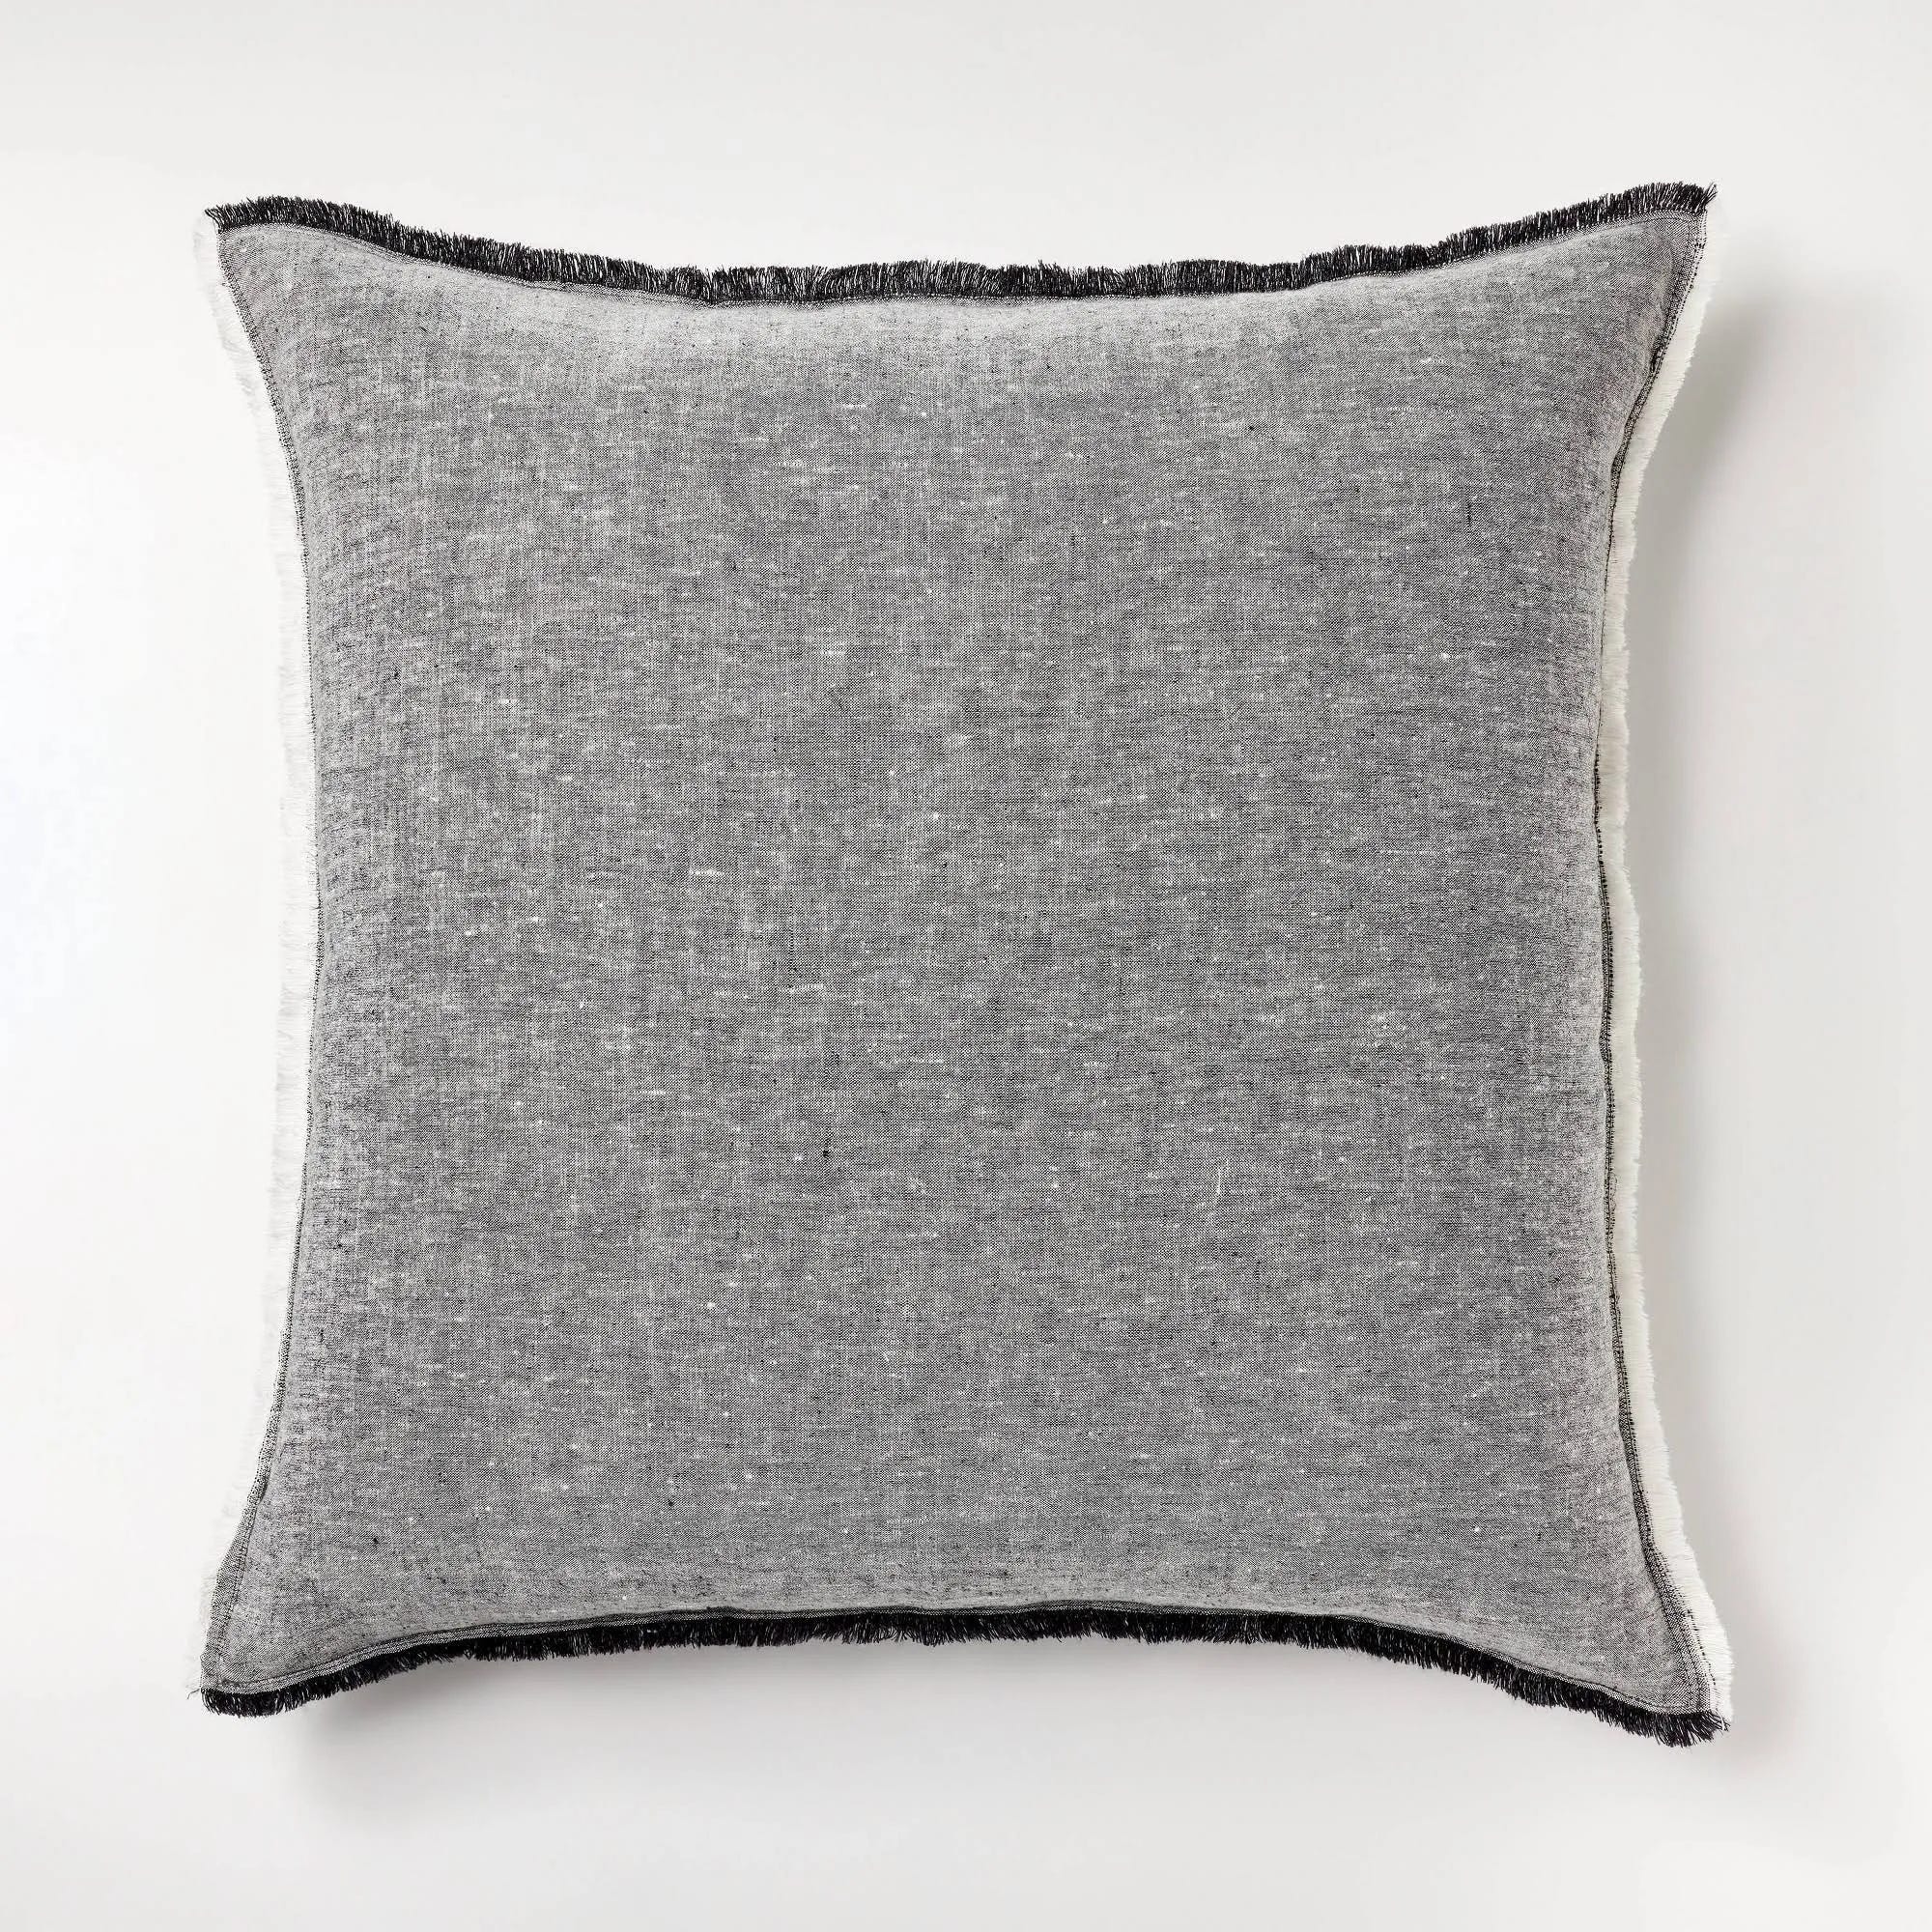 Oversized Black Linen Throw Pillow for Cozy Living Spaces | Image